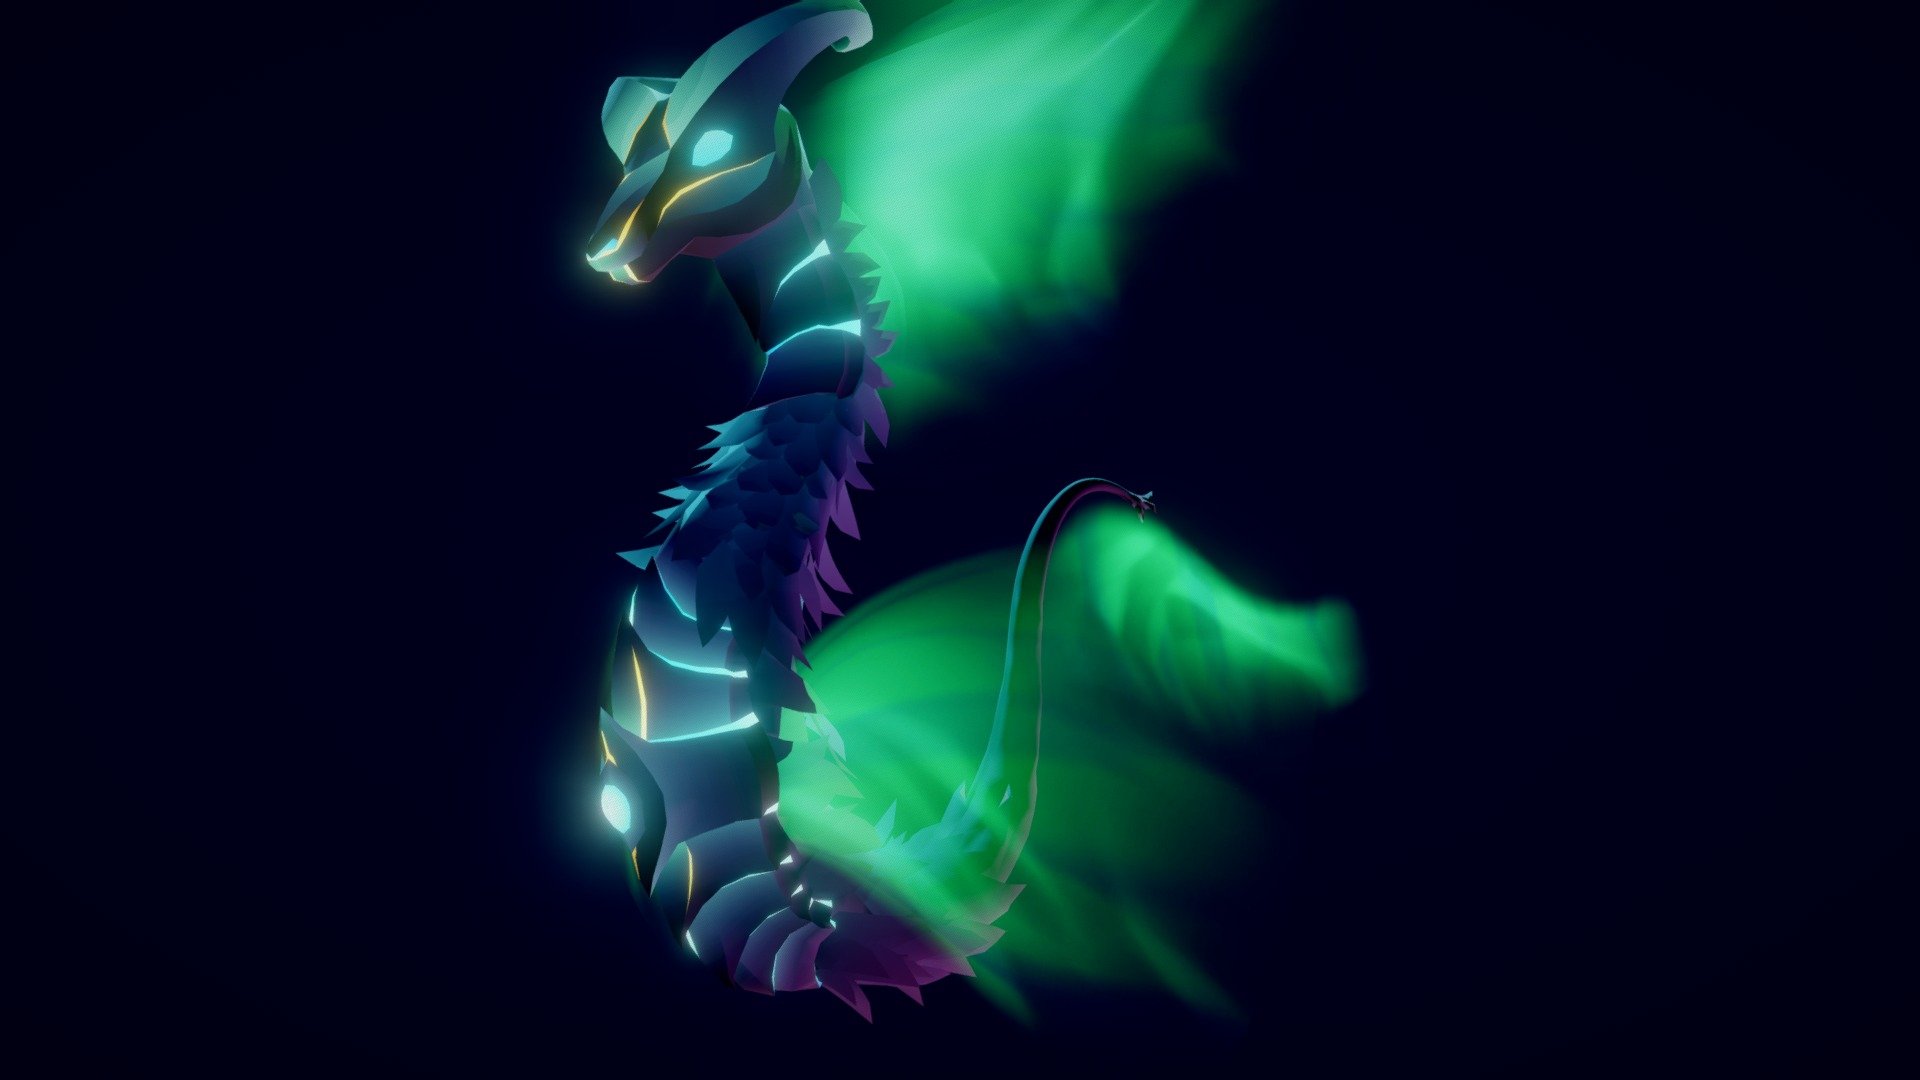 This is a dragon I've created as a chaallenge for me and as a gift for a good friend, I would guess-timate it to have taken less than a full week.

The body uses my favorite gradient-based UV-texturing methid. The wings are actually procedurally generated, but had to be made static to be uploaded on here. You can have a look a the much more impressive rendered version on my Gazing Constellations Artstation Project - Luna - minimalistic fantasy dragon - Download Free 3D model by betalars 3d model